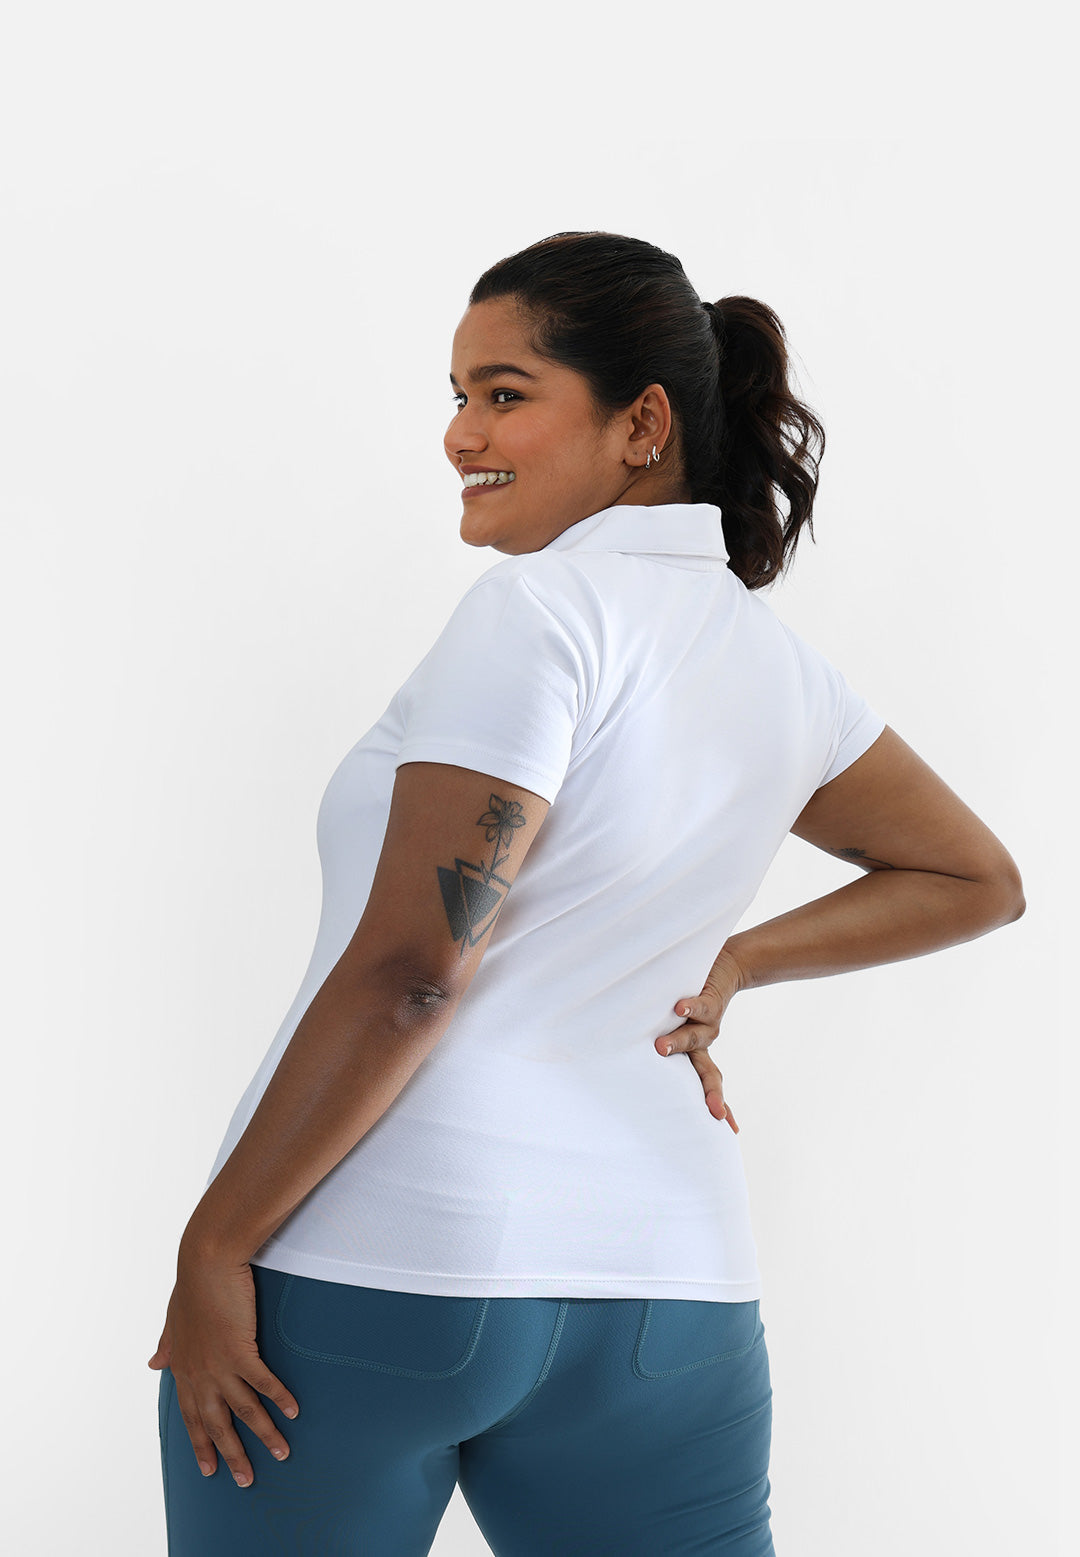 Buy Polo T-shirts for Women Online by Blissclub